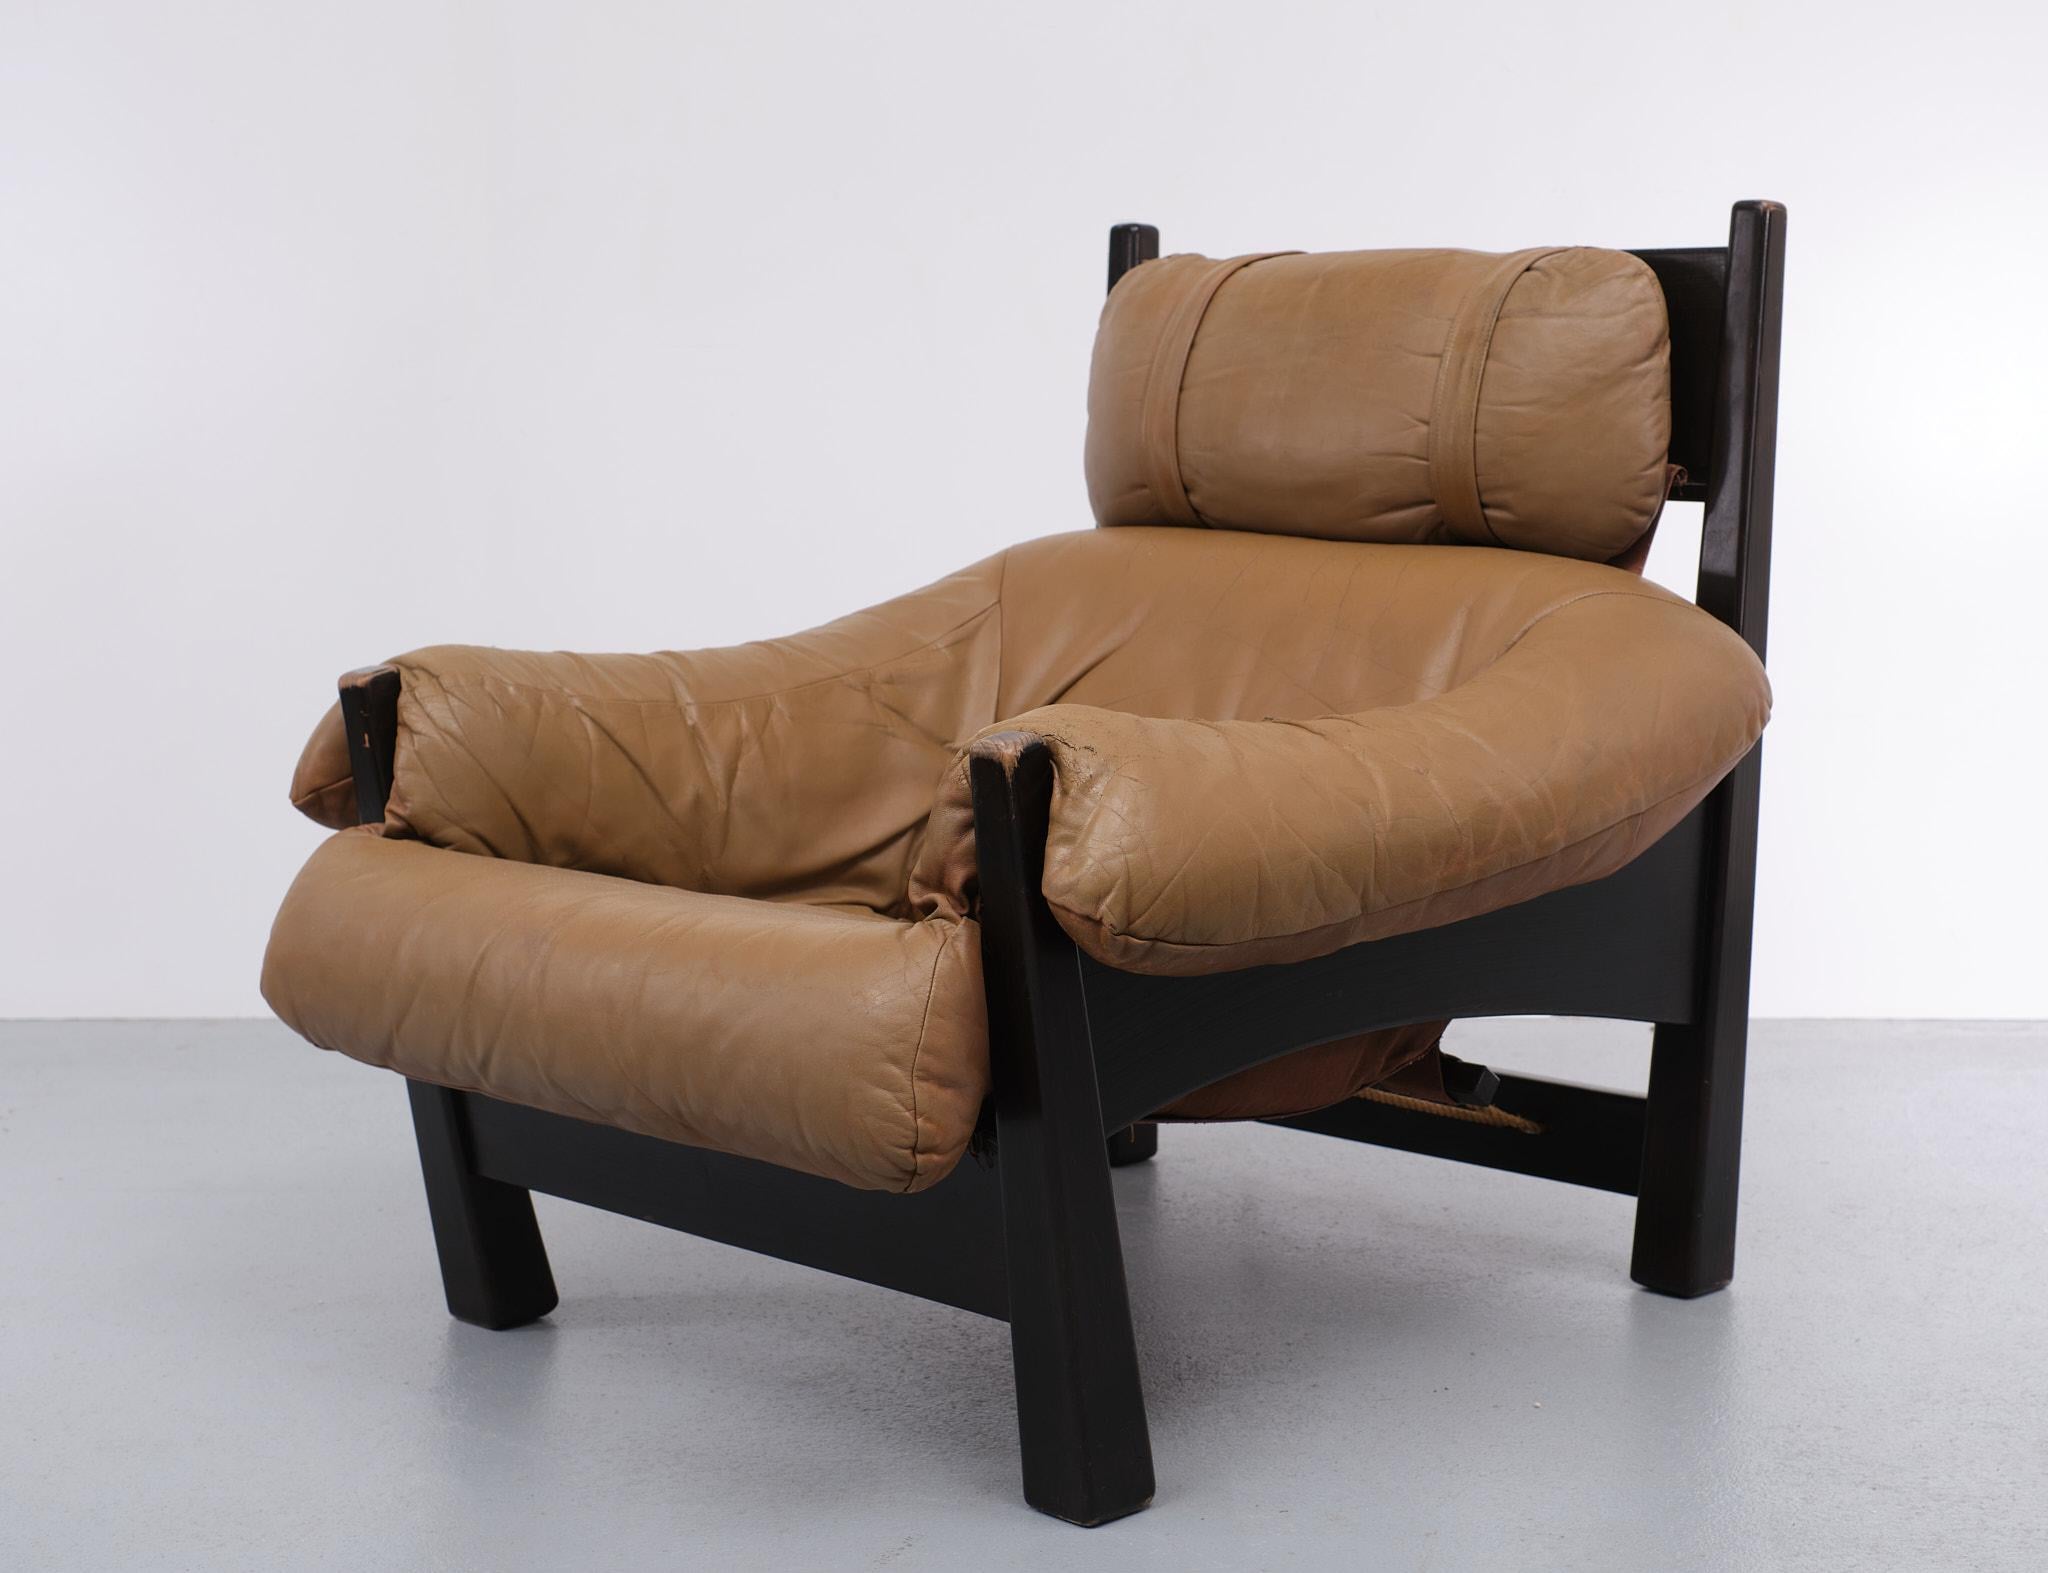 Lounge chair by Gerard van den Berg for Montis, the Netherlands 1970s 
pine/fir/spruce frame, slung/hung brown canvas support.
shaped cushion of soft camel or caramel colored leather, faded and sun bleached, with patina, seat repaired. one tear in